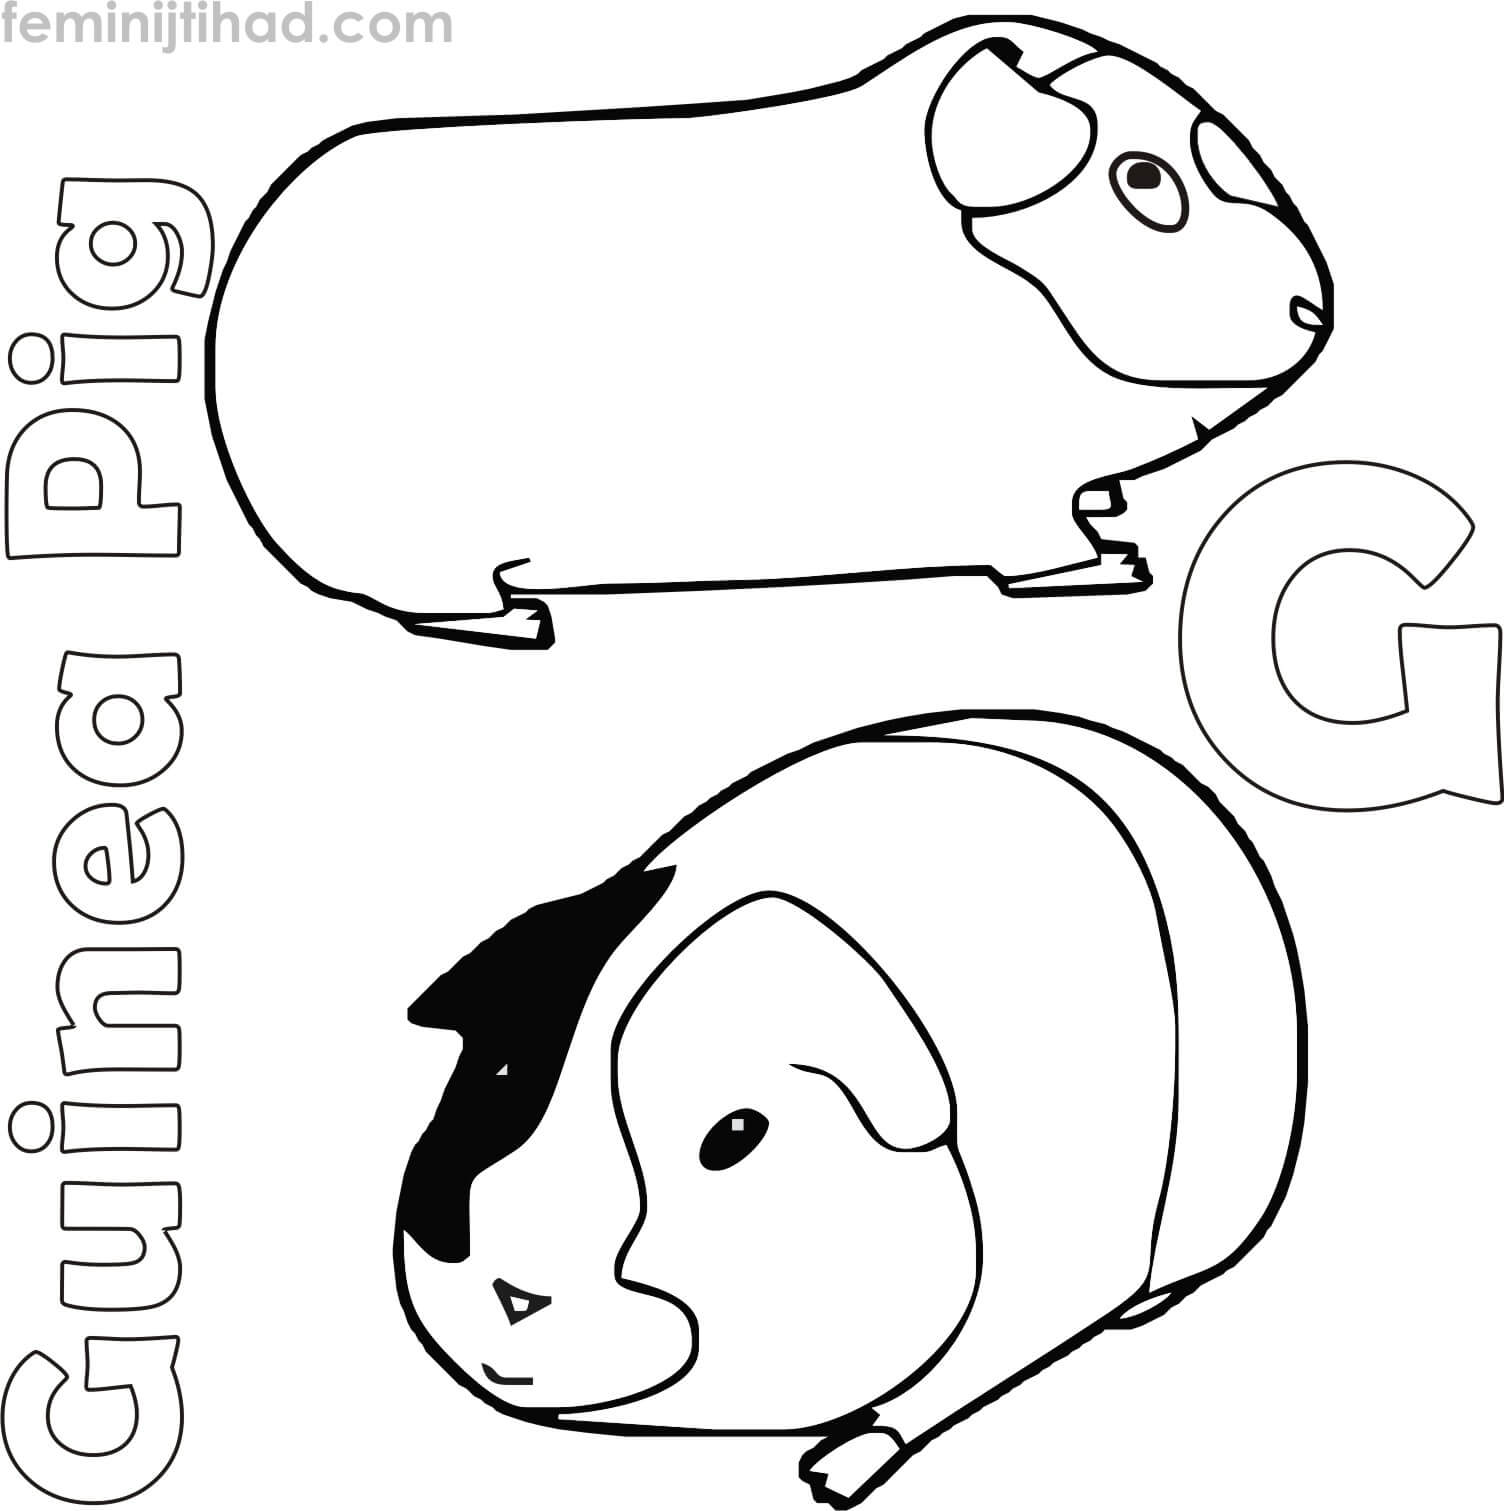 Guinea Pig coloring page free